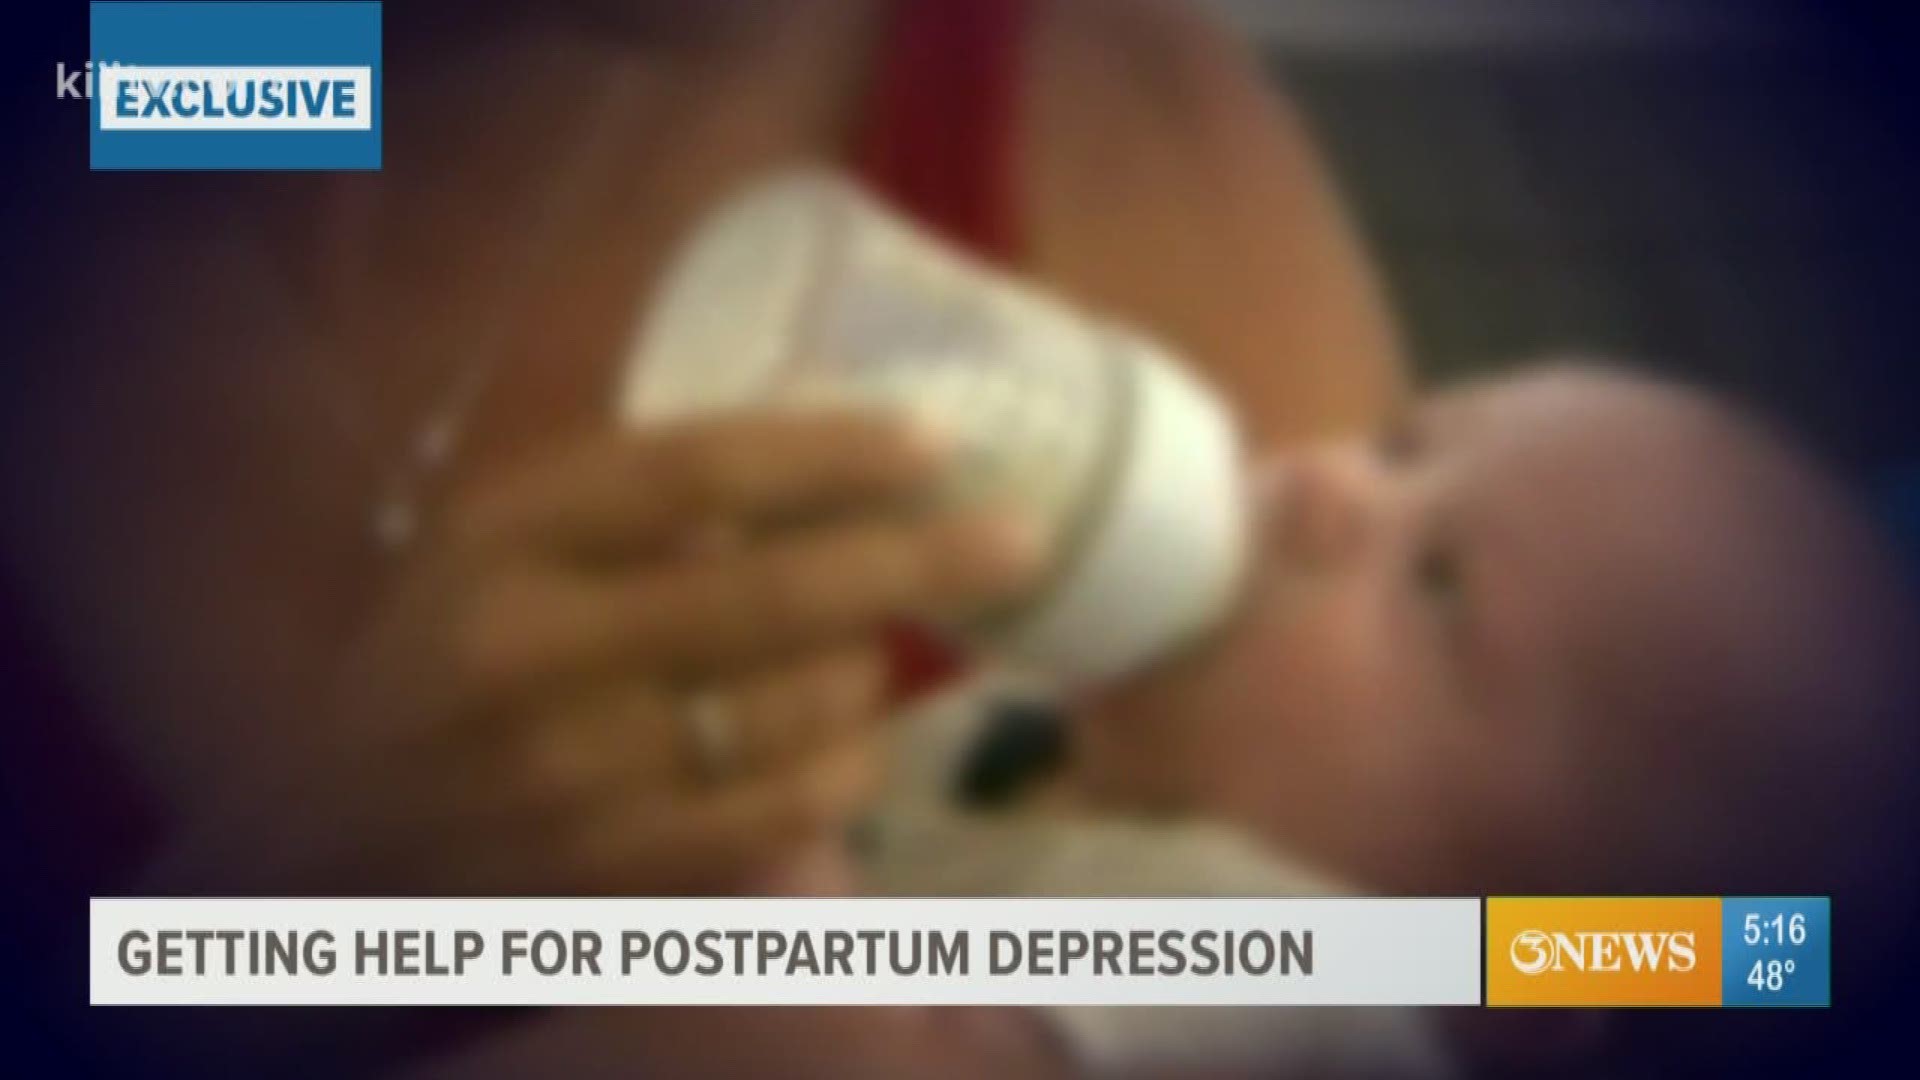 Having a child is one of the most wondrous events in a mother's life. However, every year millions of women are diagnosed with postpartum depression.